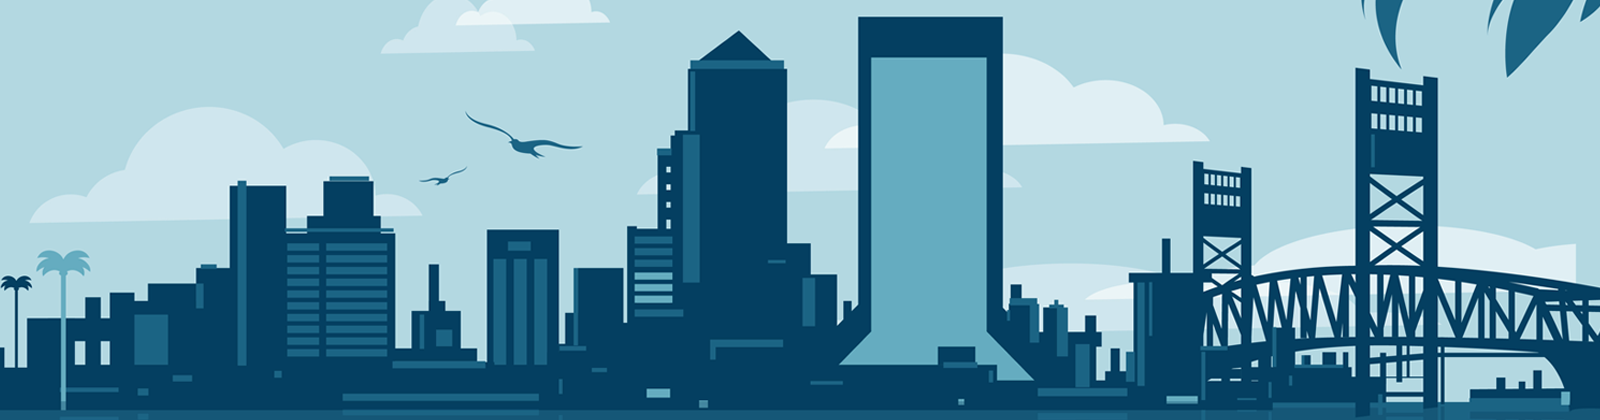 Panoramic image of downtown Jacksonville in a blue Cubist motif.